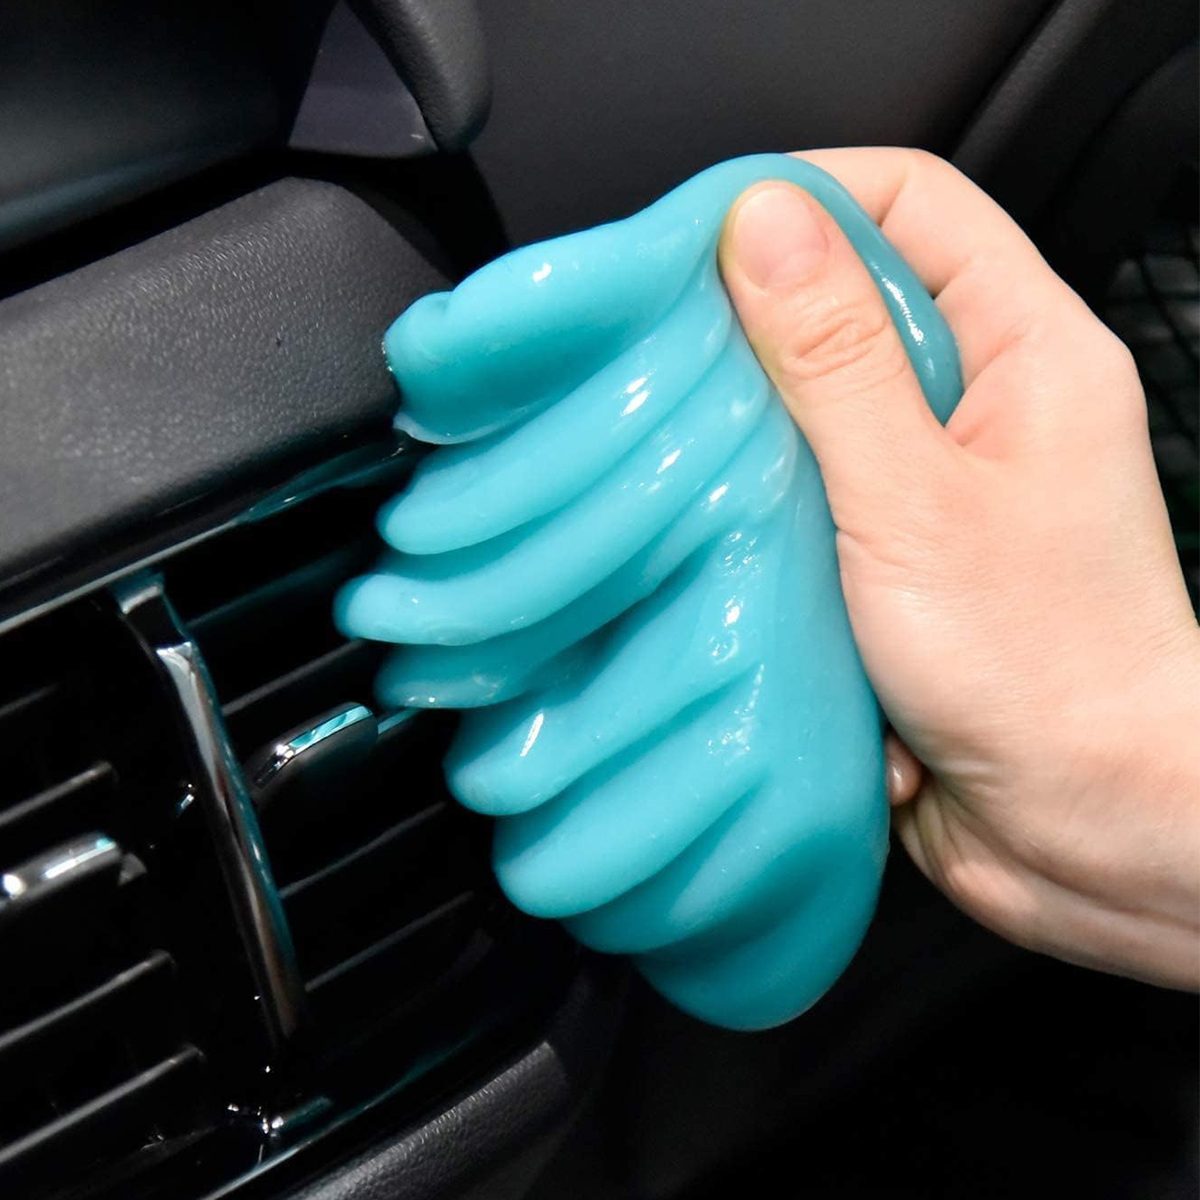 25 Best Car Accessories You'll Use All the Time